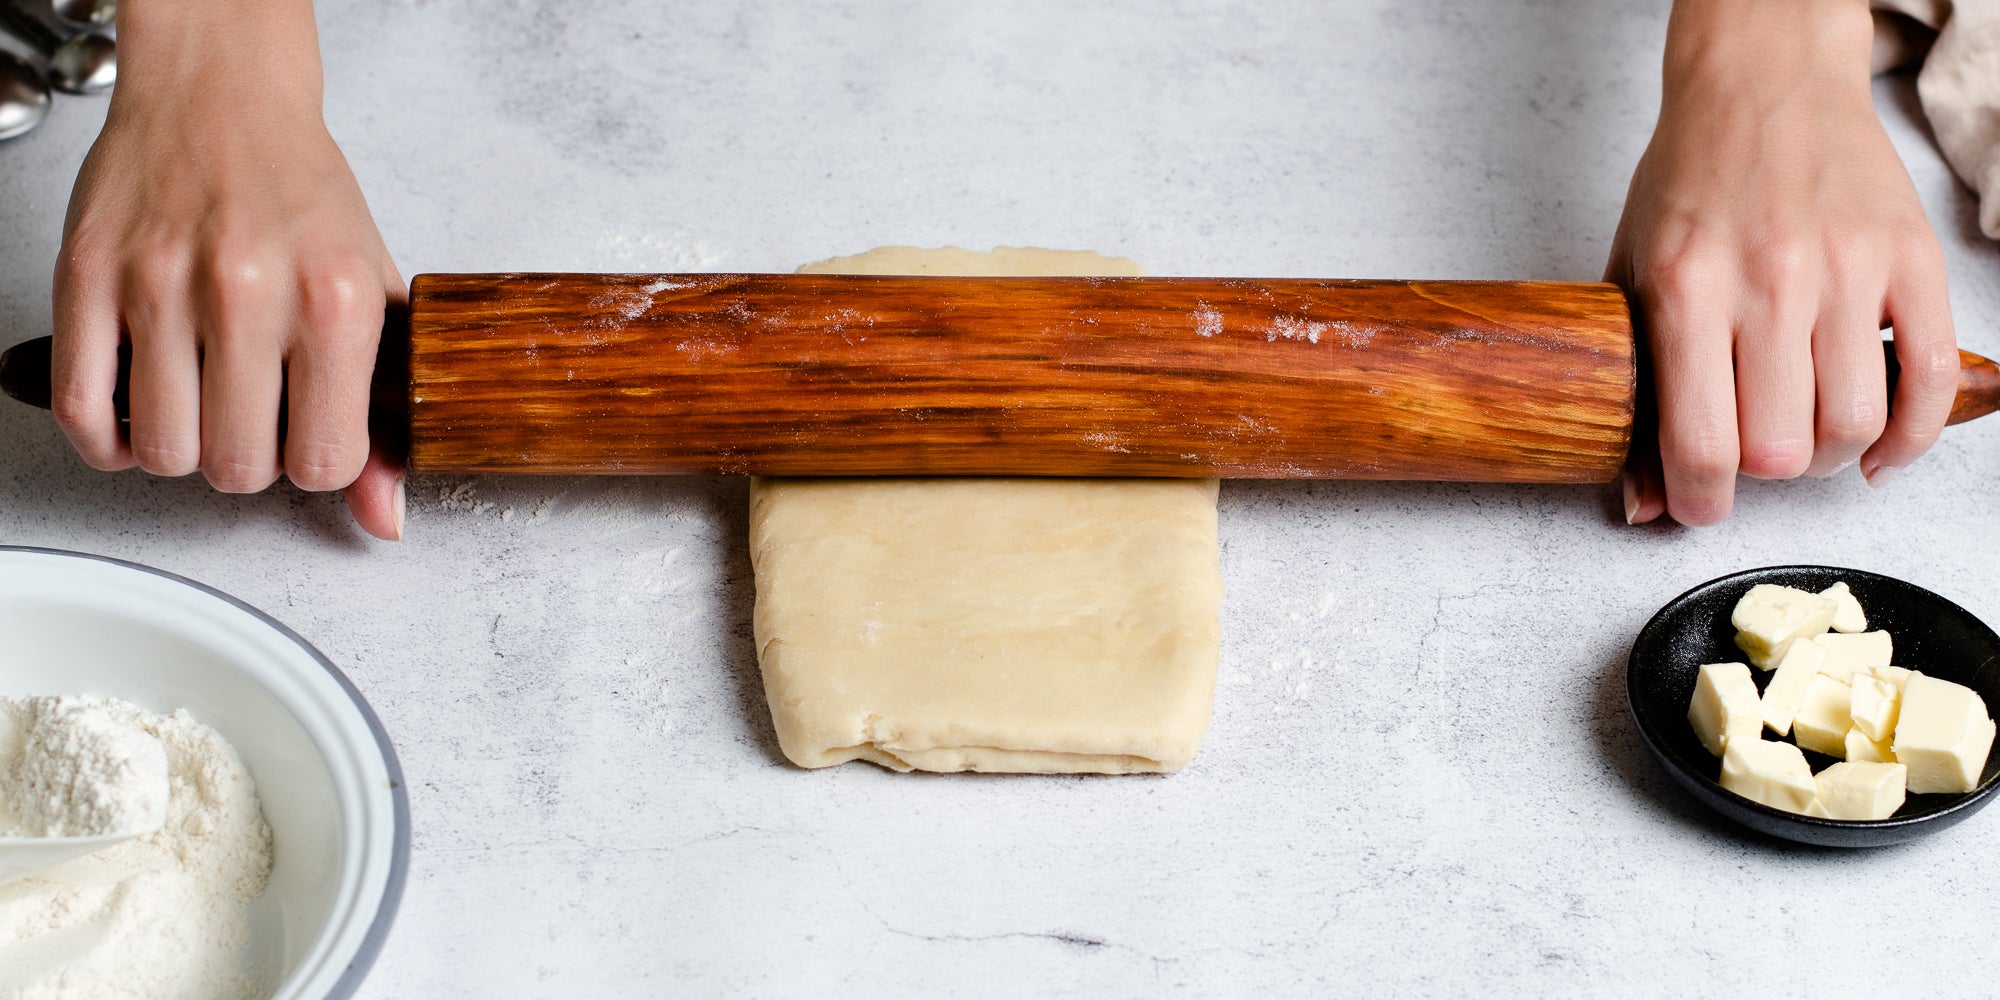 Hands rolling out Puff Pastry dough with a rolling pin, next to a dish of butter and a bowl of flour